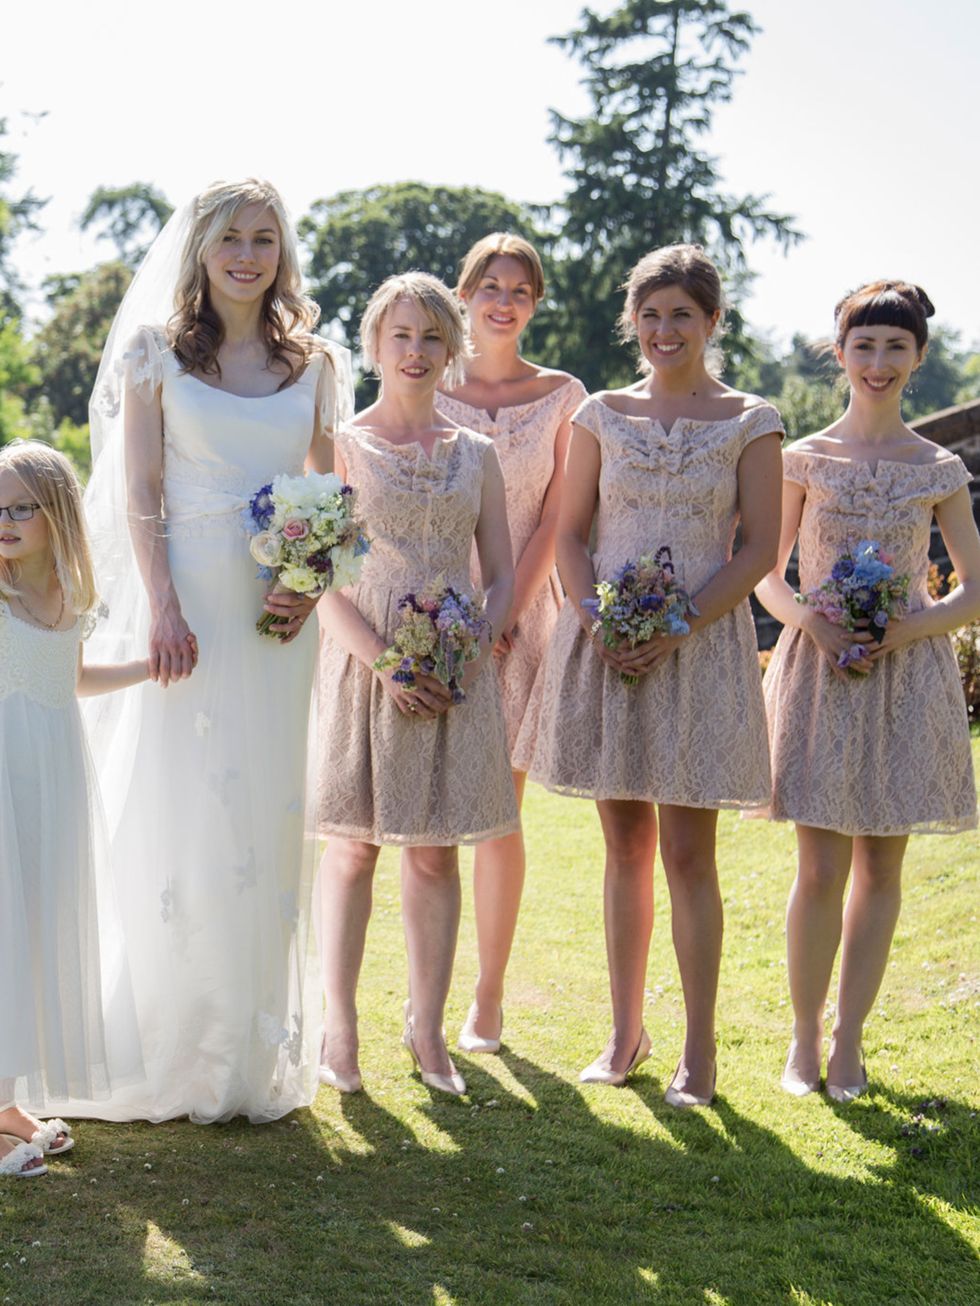 <p><strong>The Bridesmaids</strong></p><p>'My four bridesmaids were only too happy to swap floating chiffon and empire lines for something with a bit more personality. They readily bought into my <em>Mad Men</em> meets <a href="http://www.elleuk.com/catwa